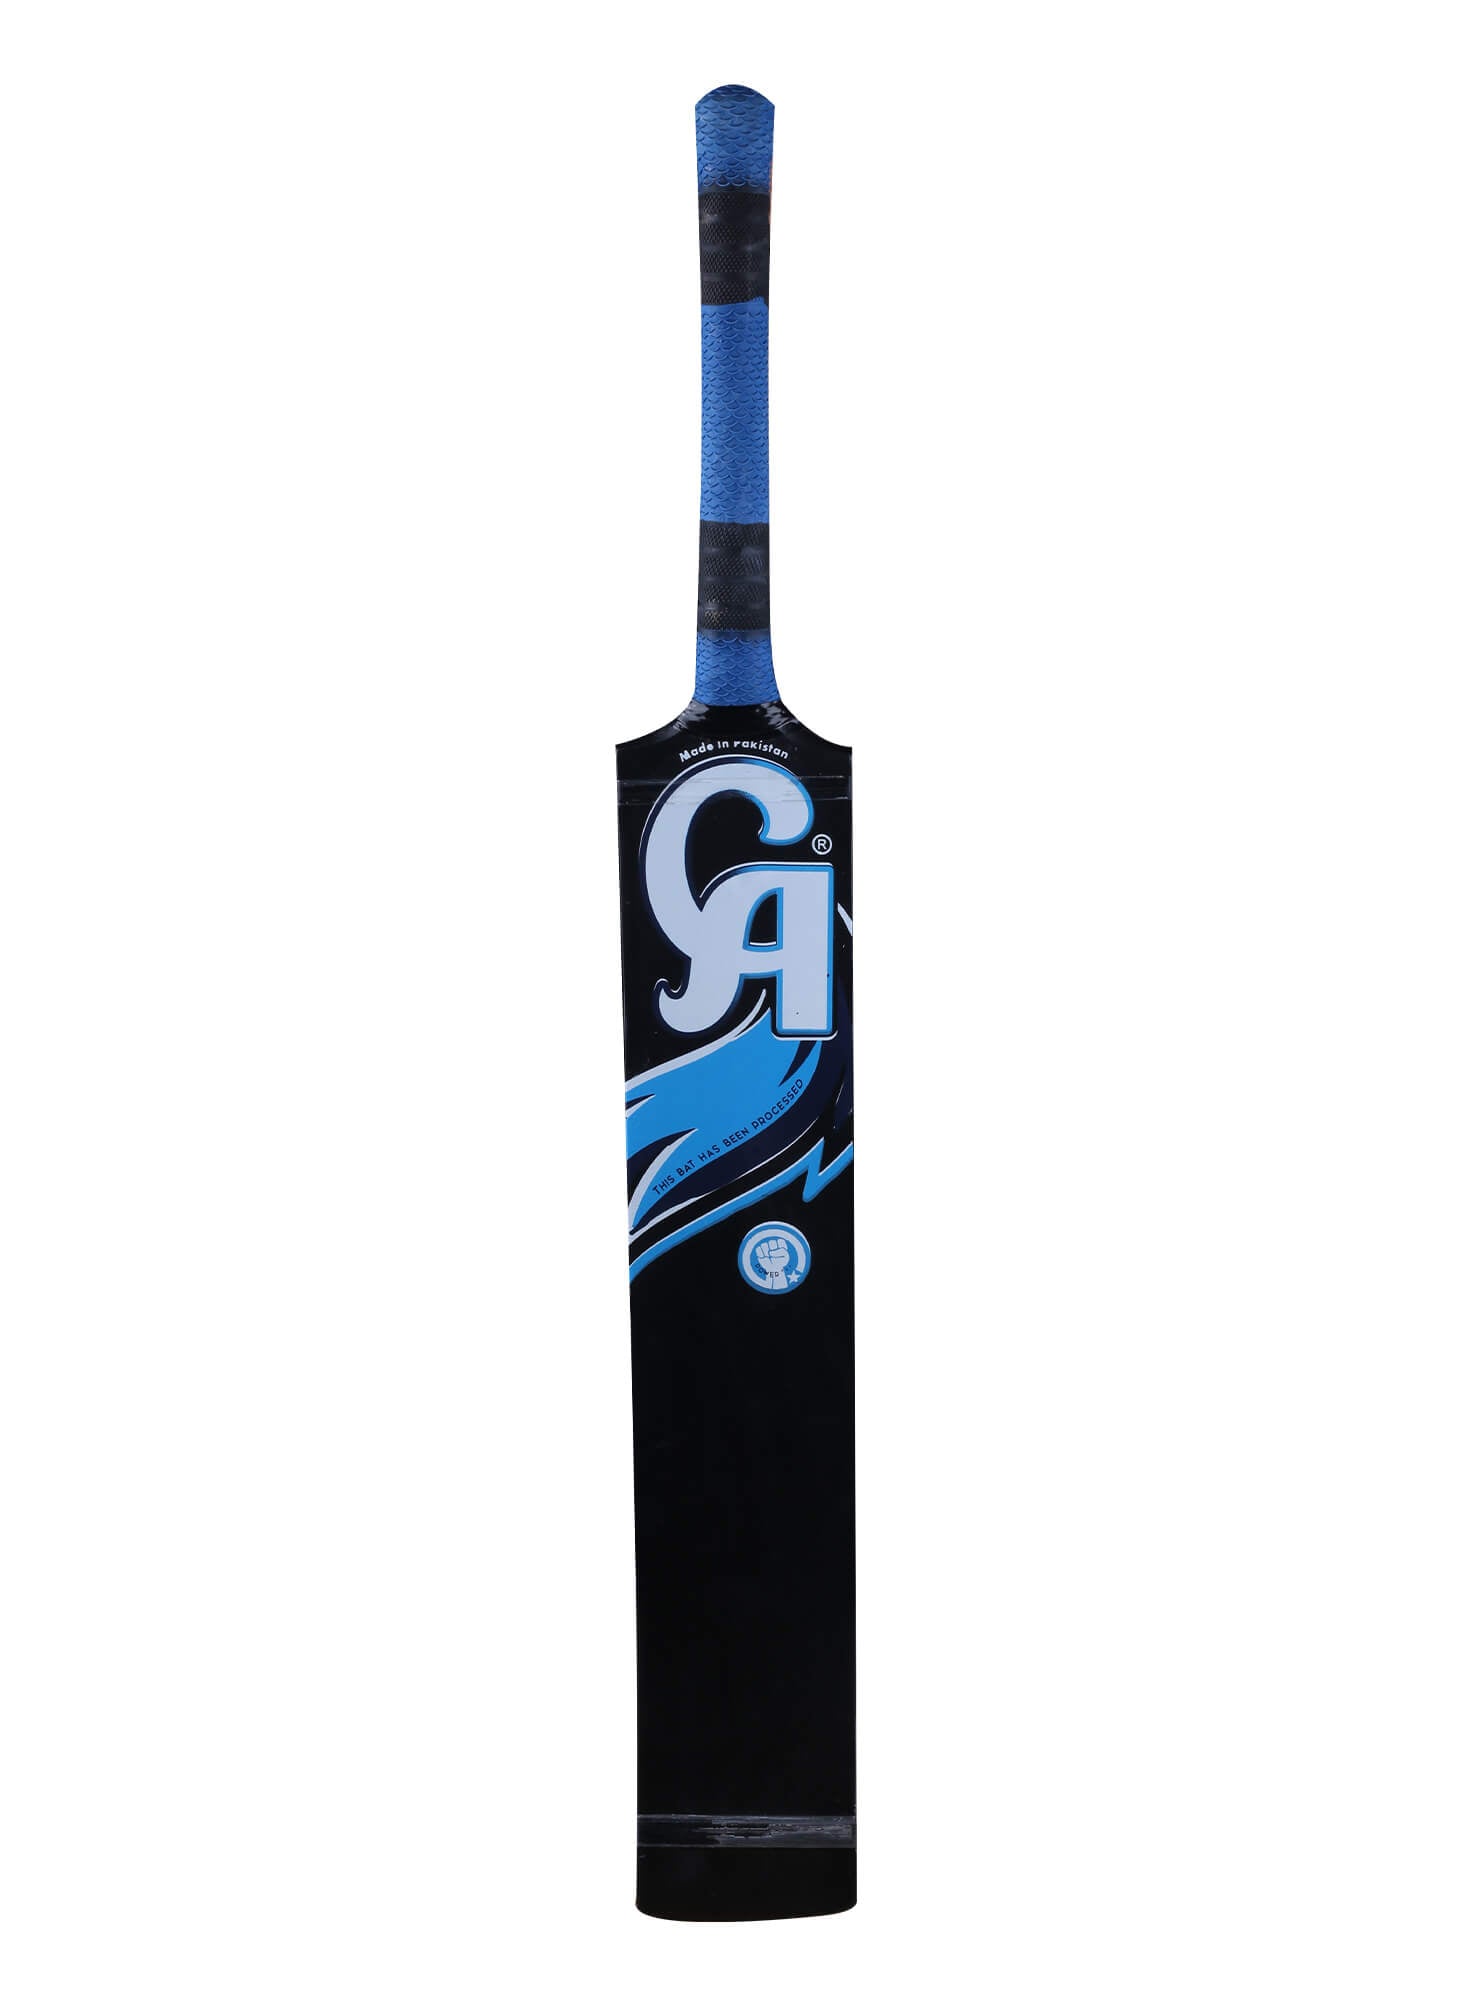 Wolf Power-Tek tennis ball cricket bat, handcrafted from Popular willow, lightweight and ideal for tournaments with a double-colored grip and Power-Tek technology for extra blade power.